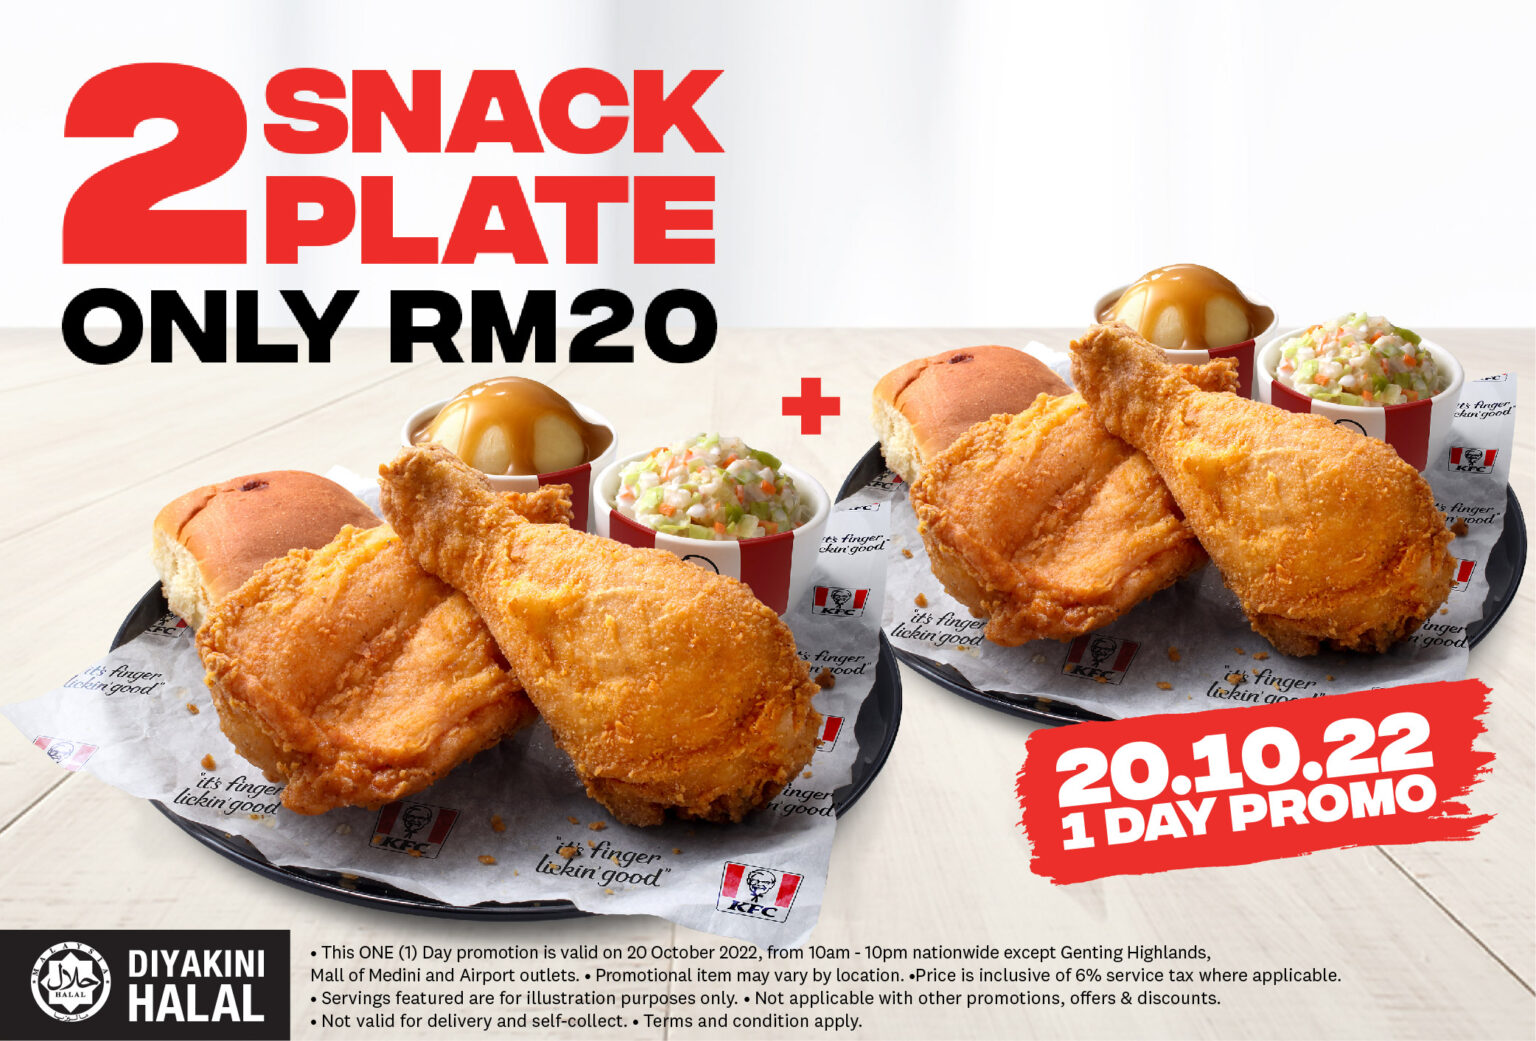 Finger Lickin’ Good 2 Kfc Snack Plates For Rm20 But Only On Oct 20 Focus Malaysia